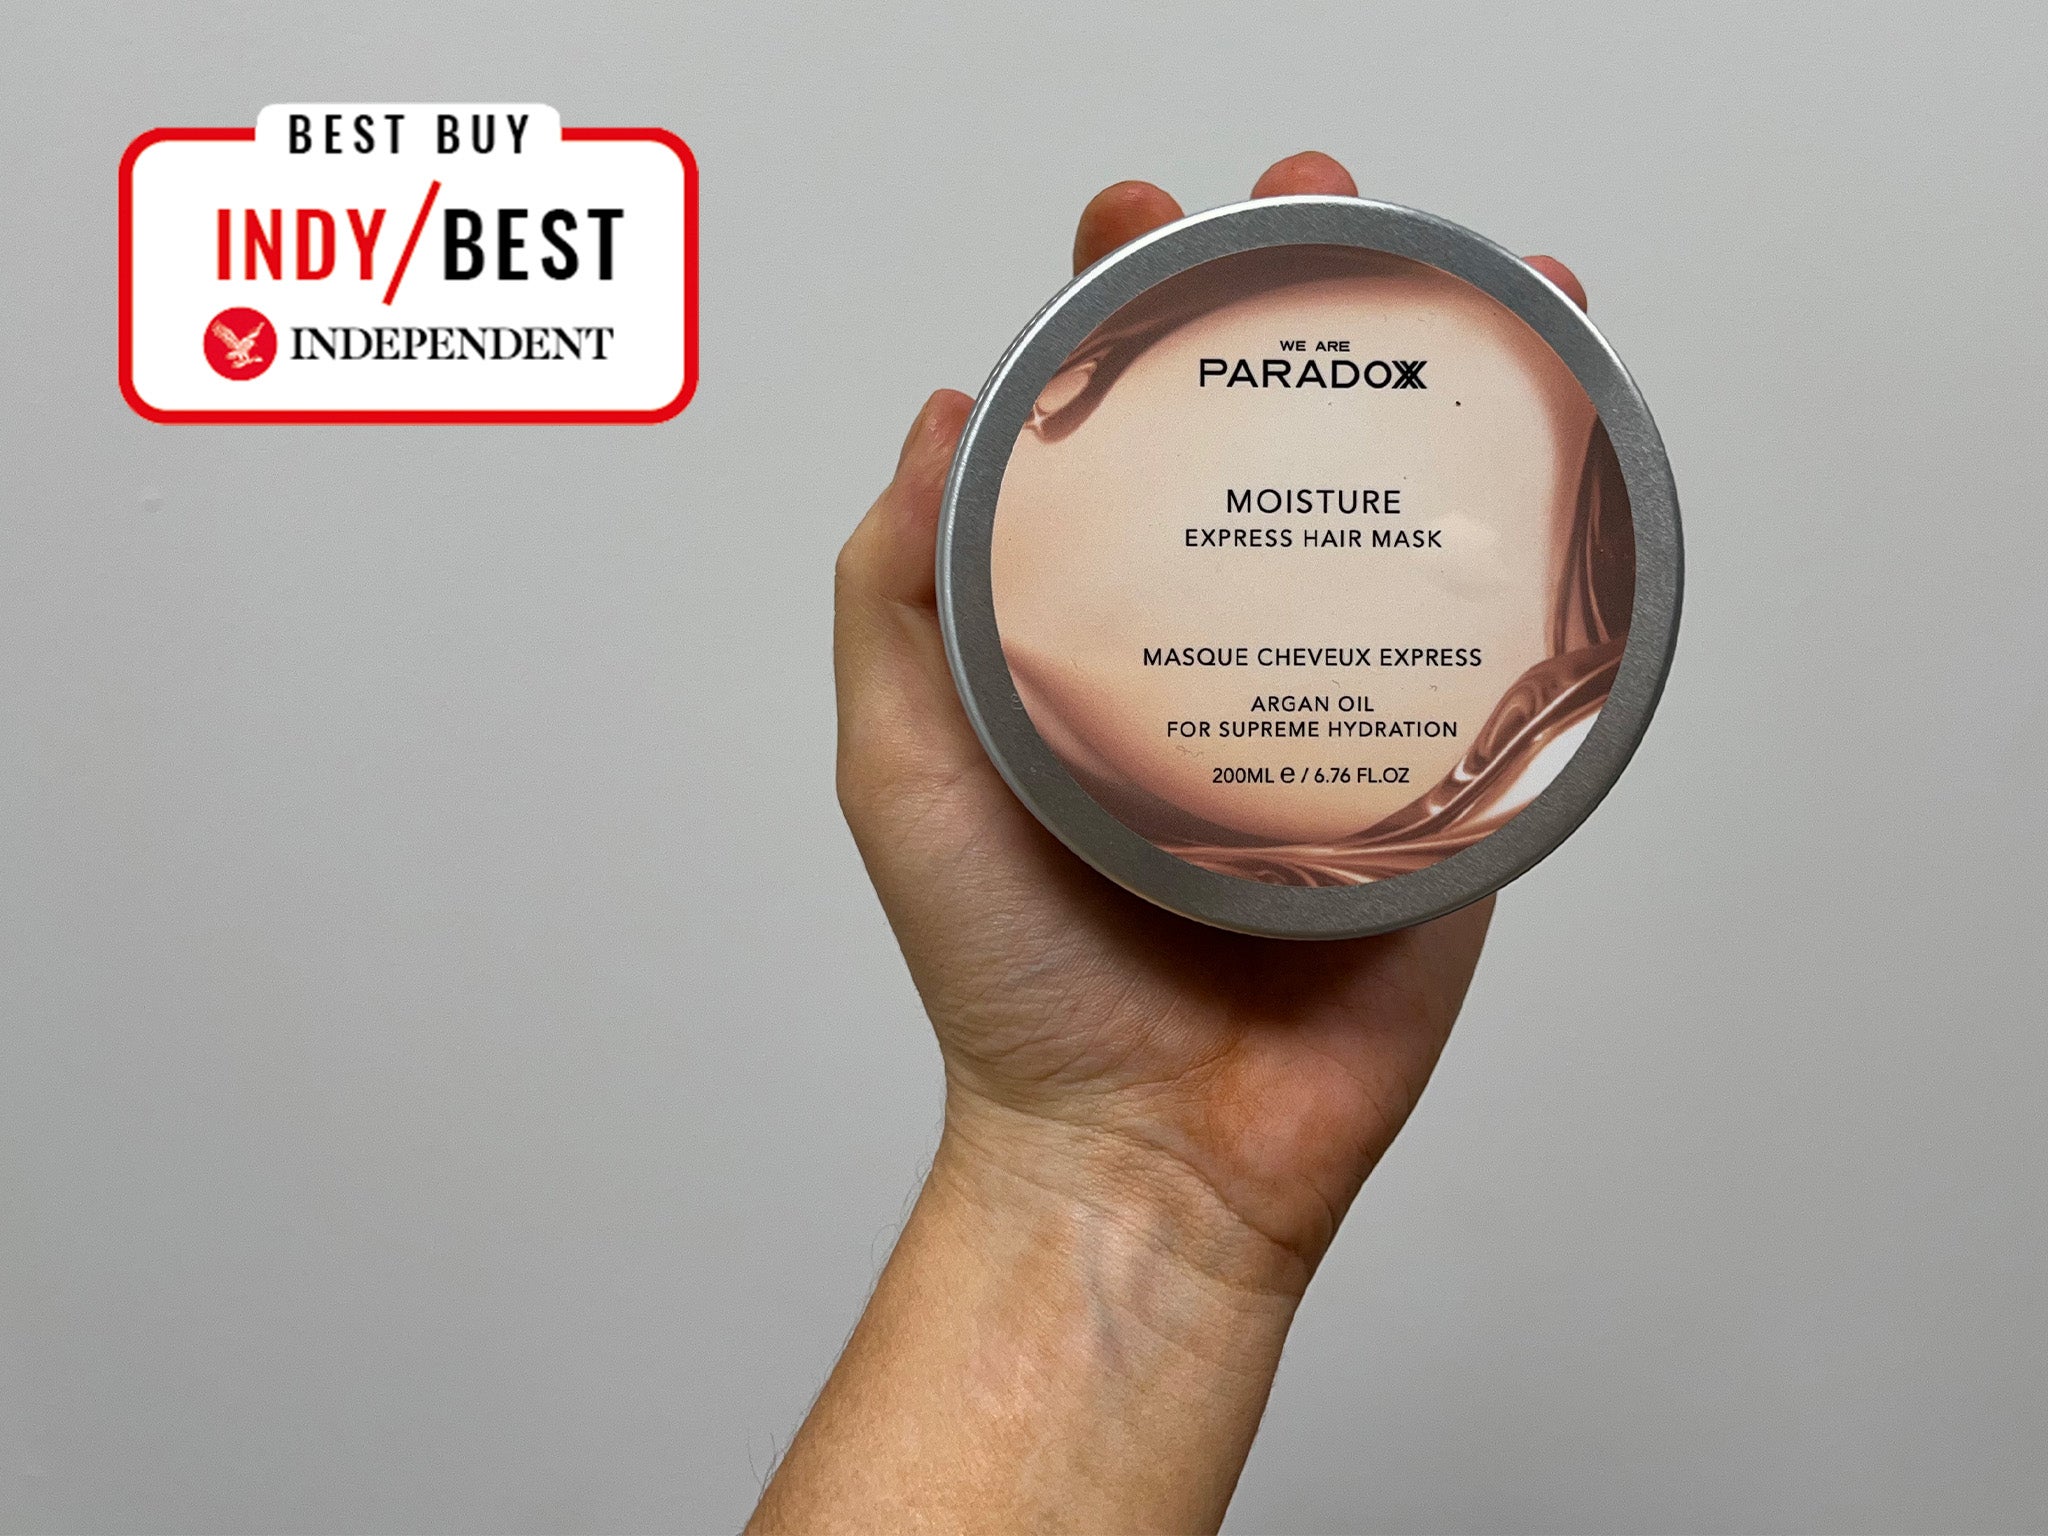 We Are Paradoxx moisture express hair mask